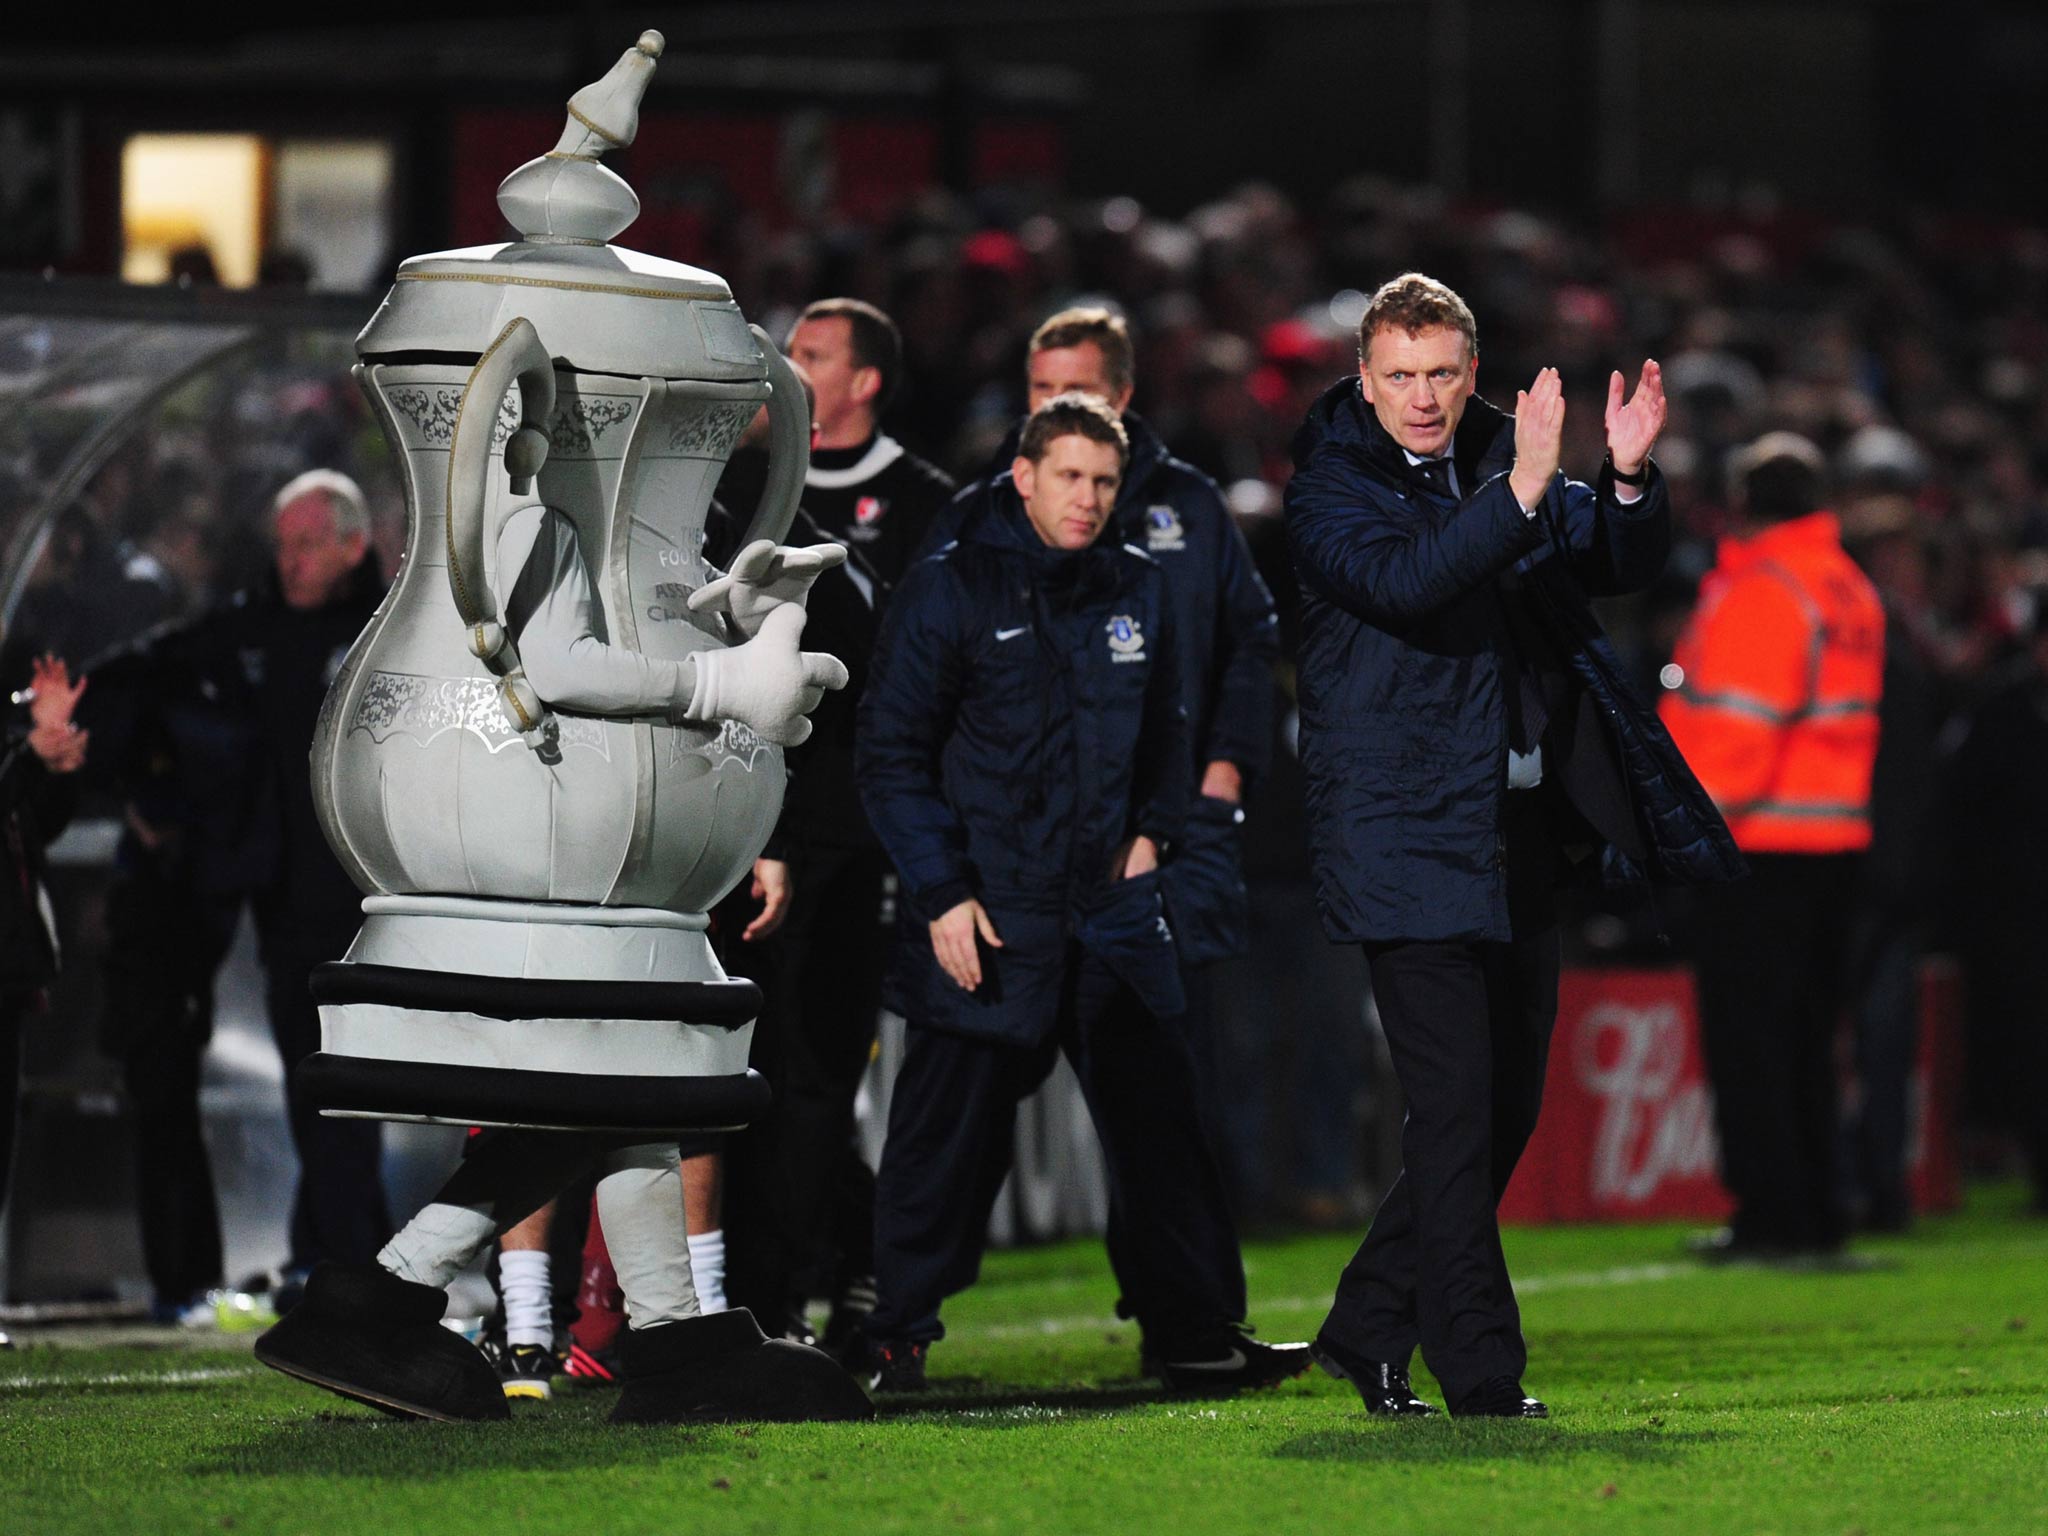 Davids Moyes with an FA Cup mascot